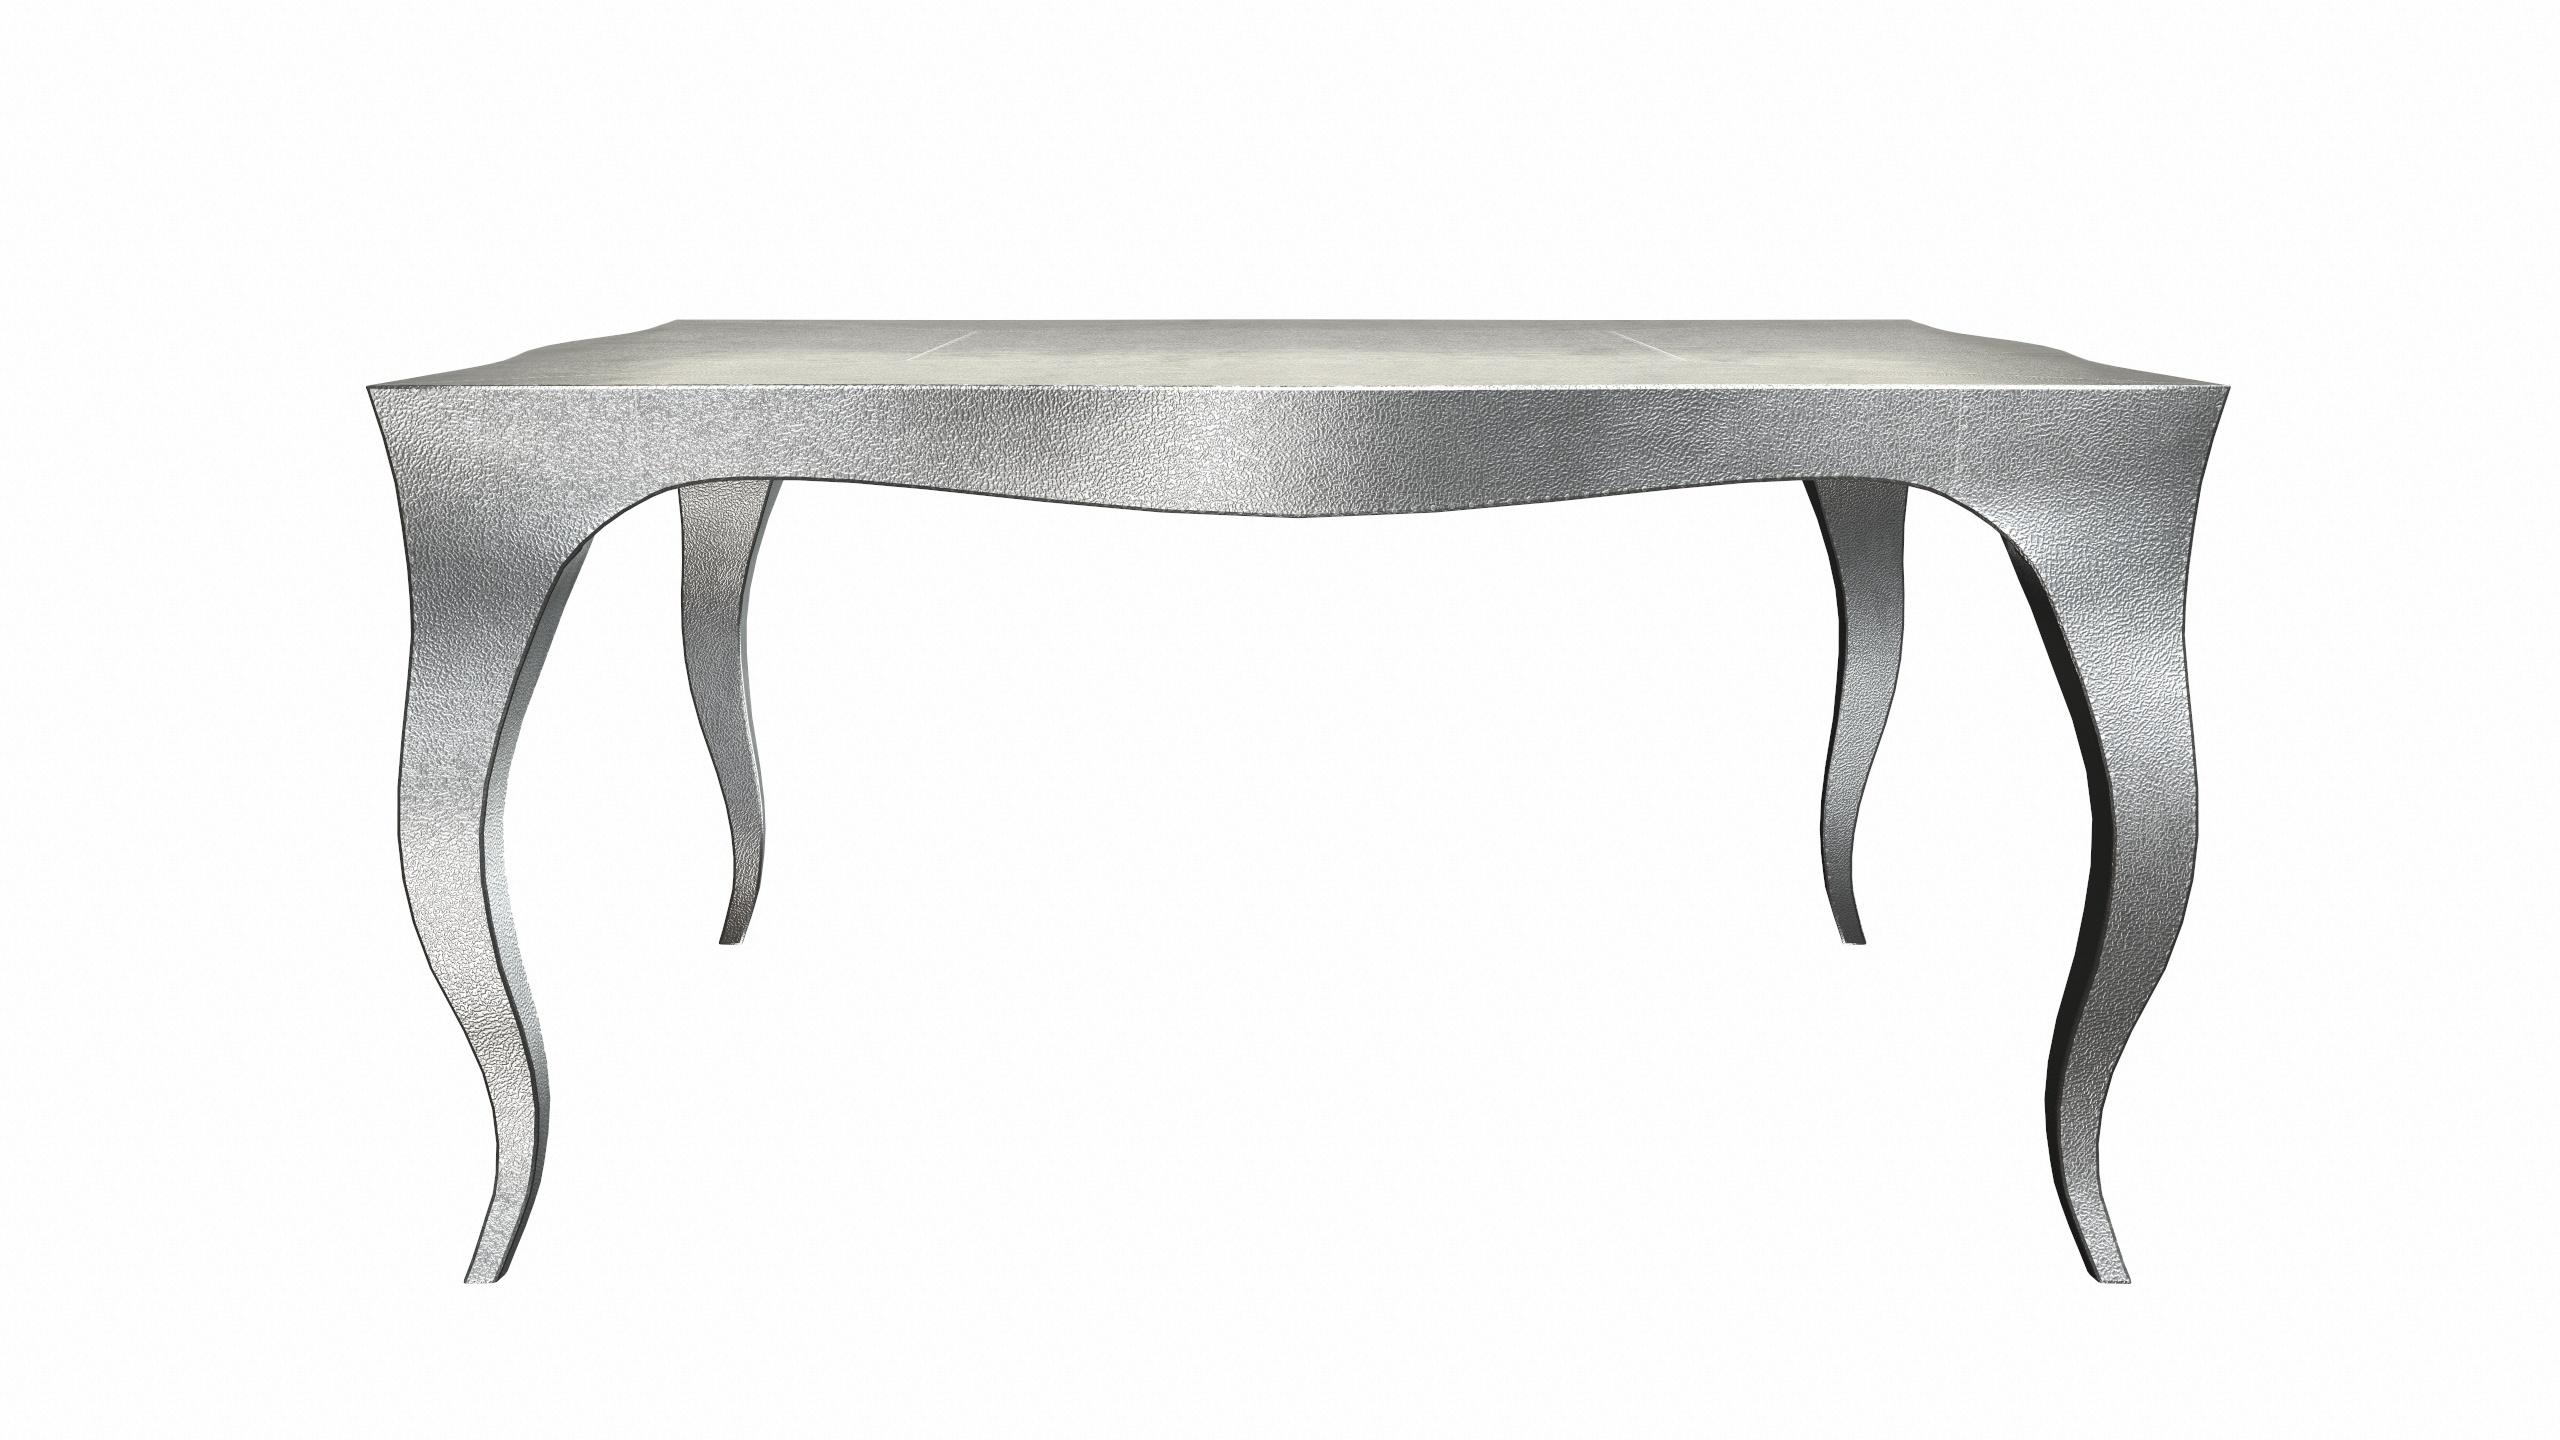 American Louise Art Deco Center Tables Fine Hammered White Bronze 18.5x18.5x10 inch For Sale